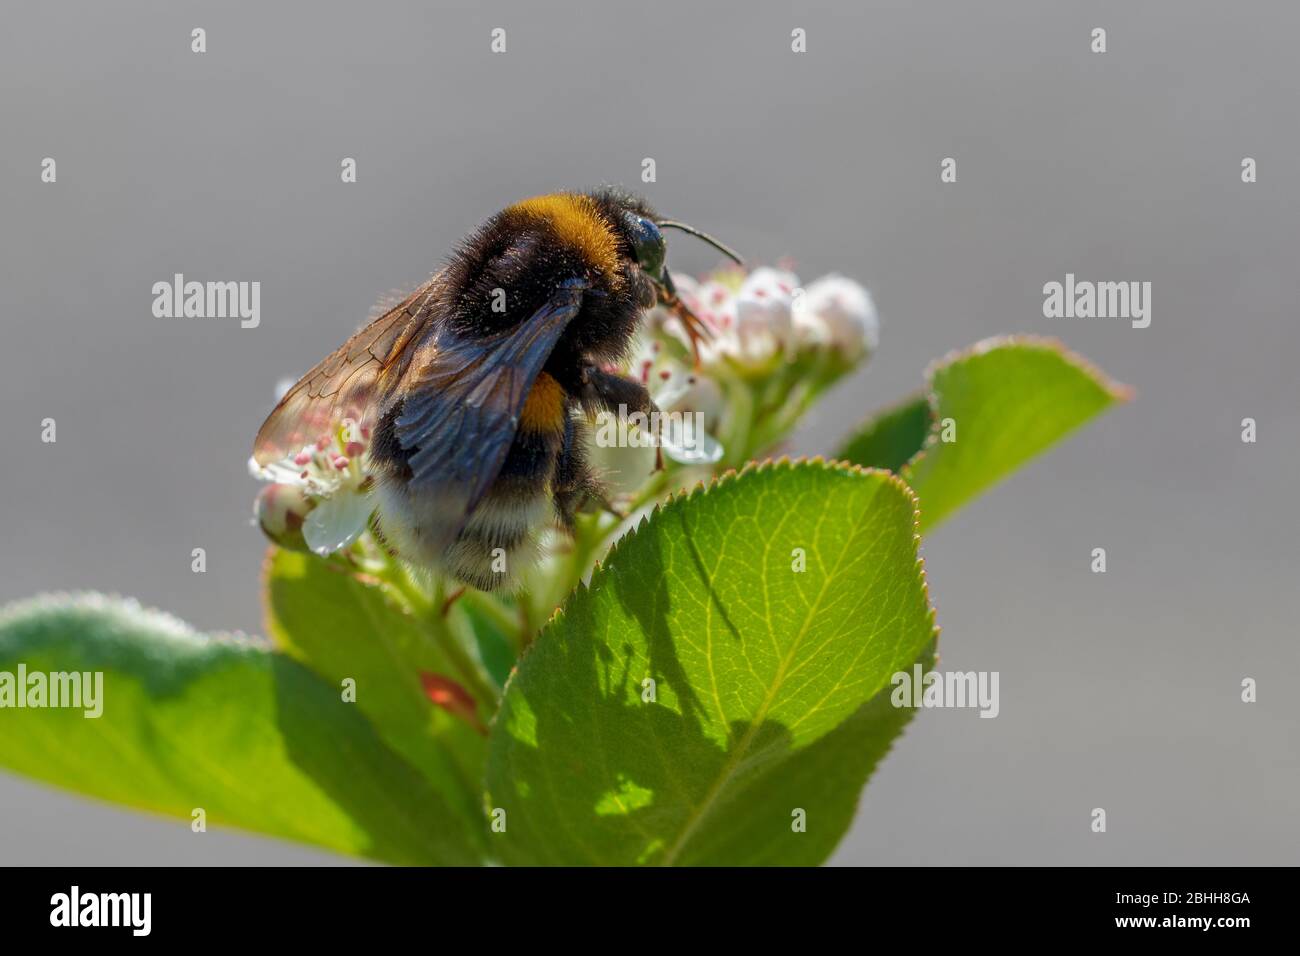 Bumblebee on a blooming Aronia flower in the spring morning. Stock Photo